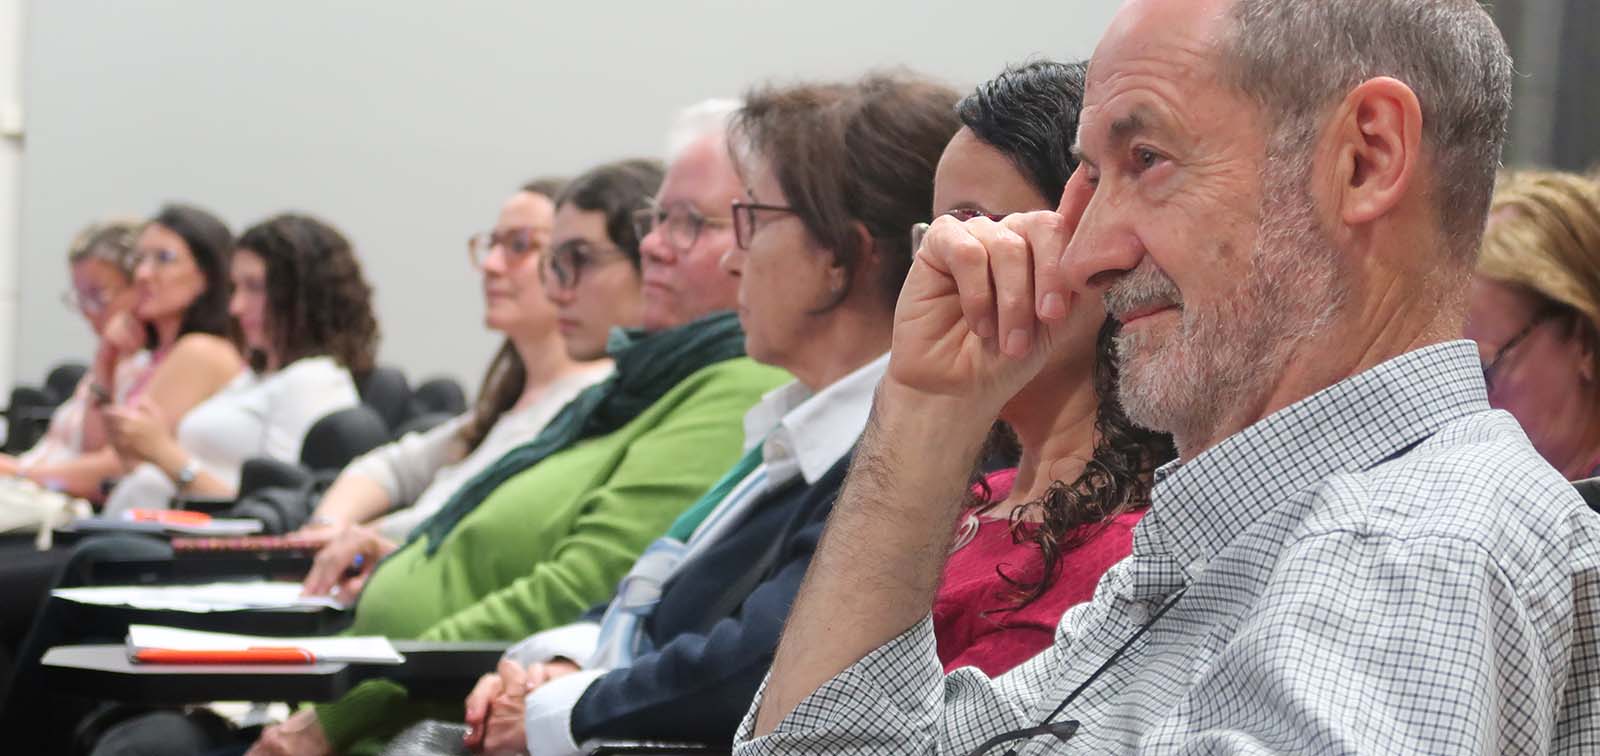 Quim Gascon, co-director of ISGlobal's Chagas Initiative, and other attendees at the meeting.